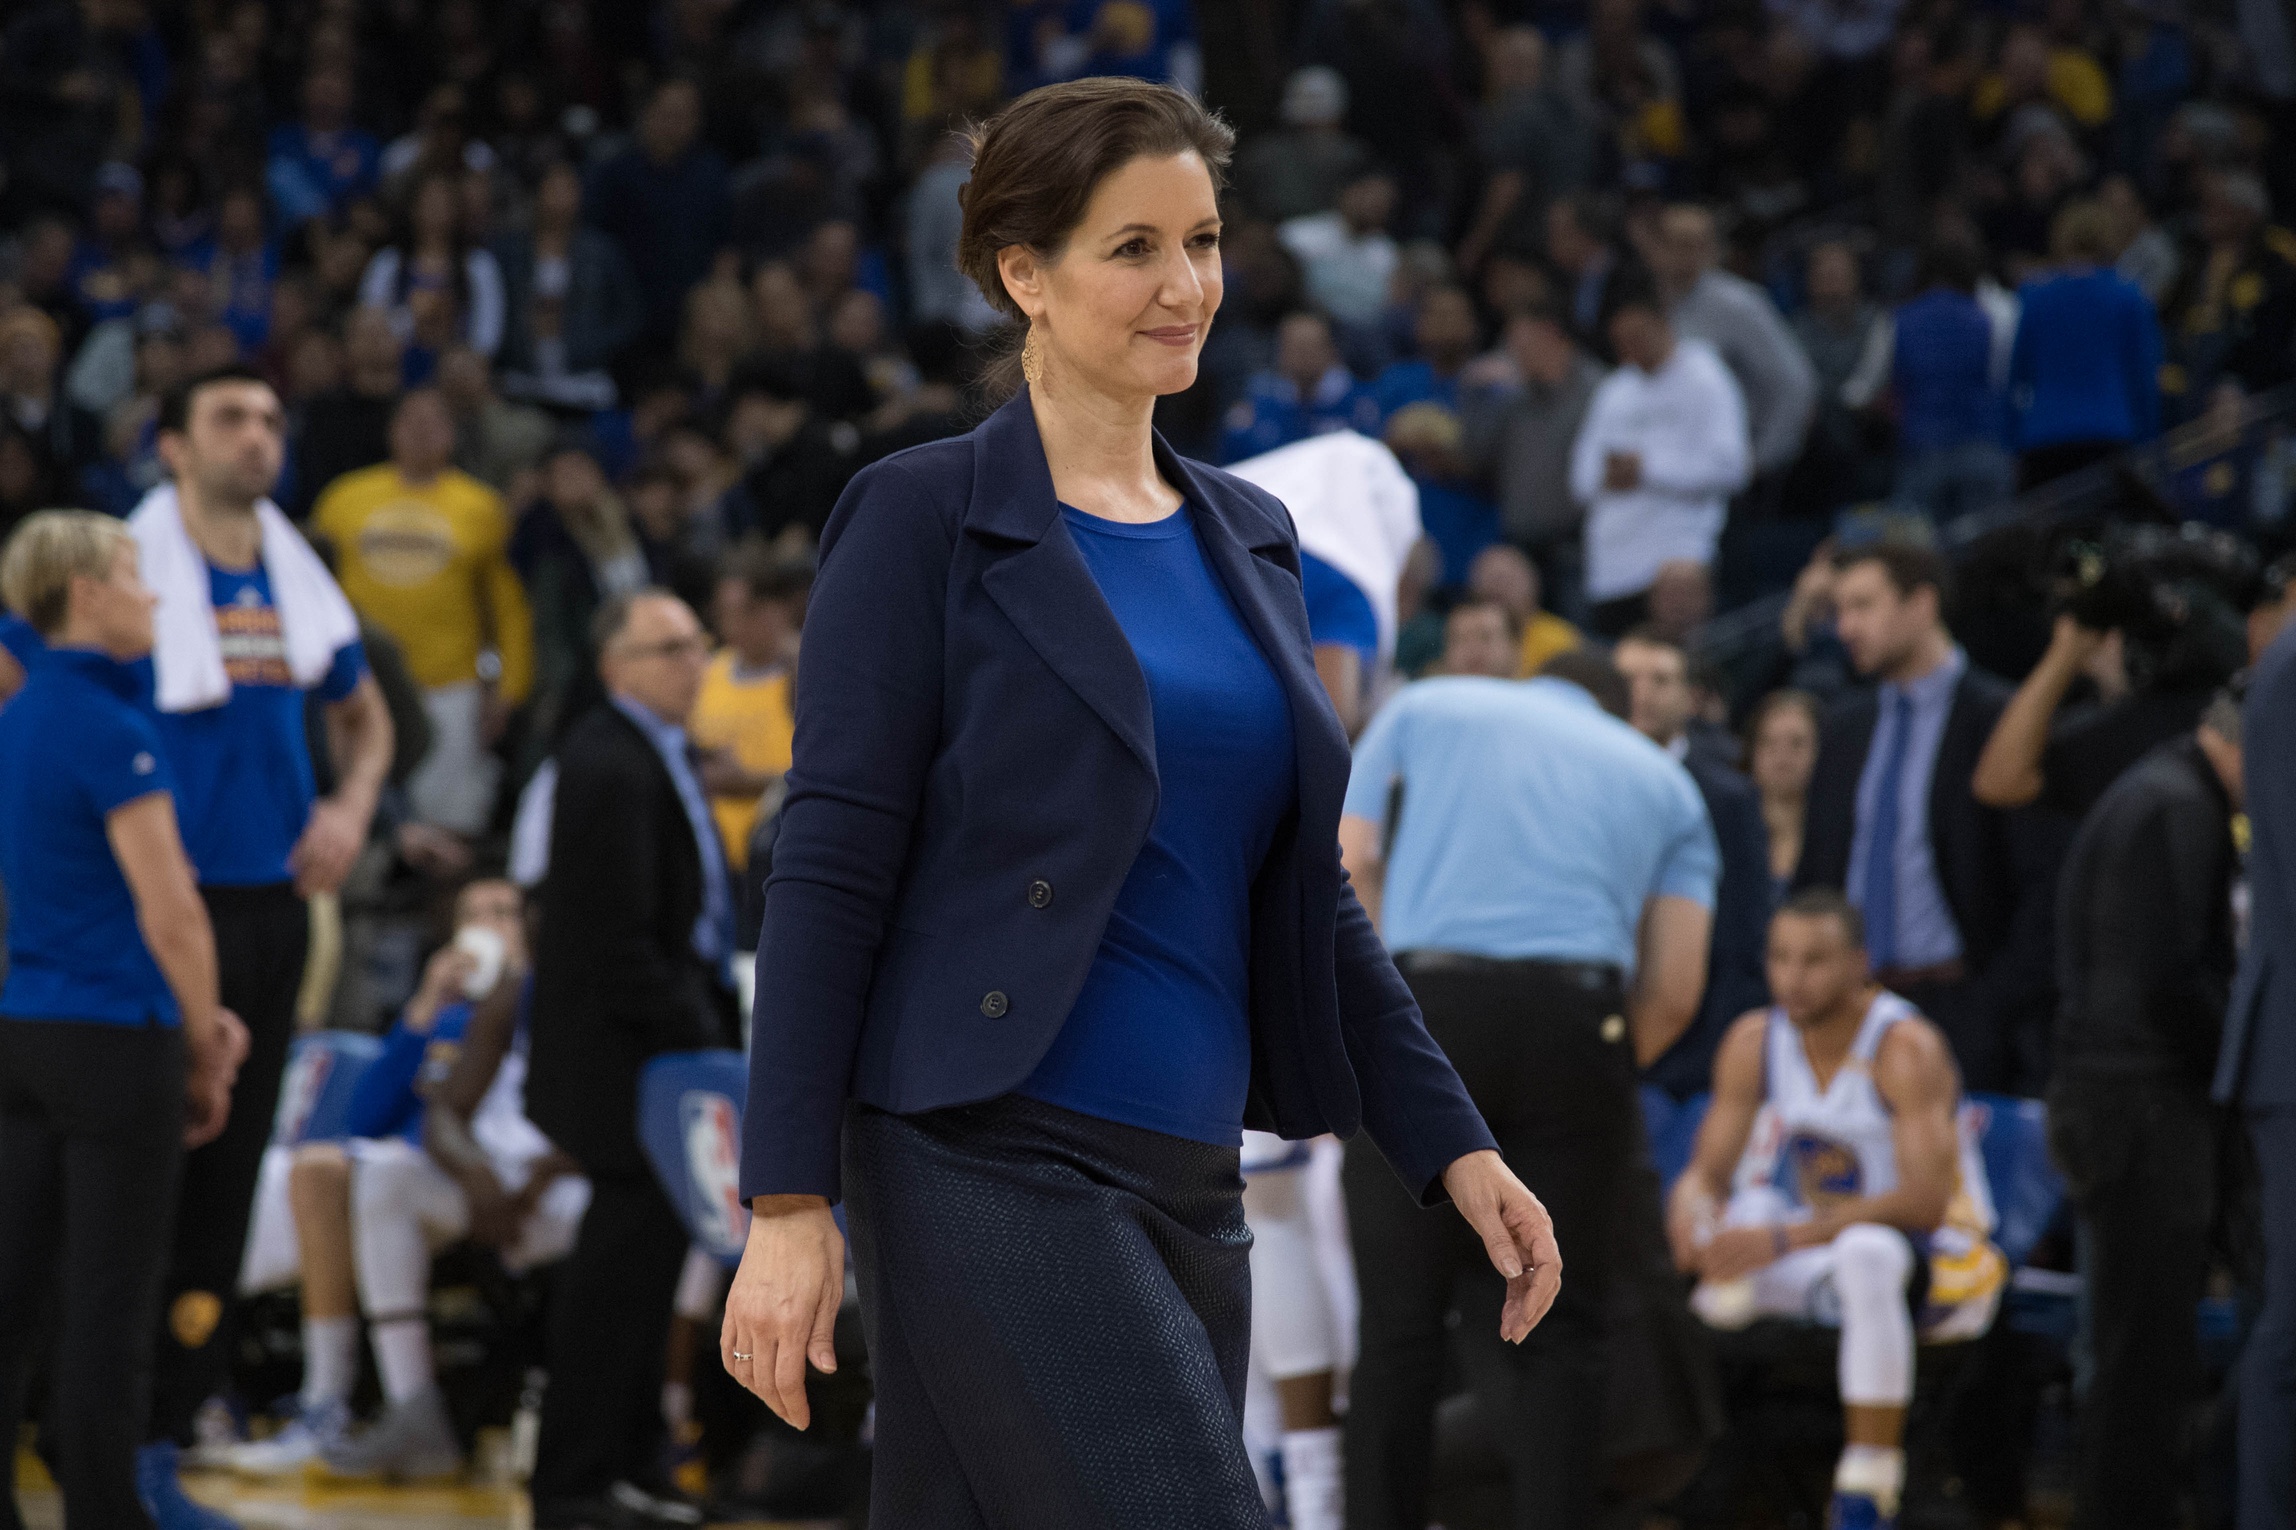 Caption: January 12, 2017; Oakland, CA, USA; Oakland mayor Libby Schaaf during the second quarter between the Golden State Warriors and the Detroit Pistons at Oracle Arena. The Warriors defeated the Pistons 127-107. Mandatory Credit: Kyle Terada-USA TODAY Sports